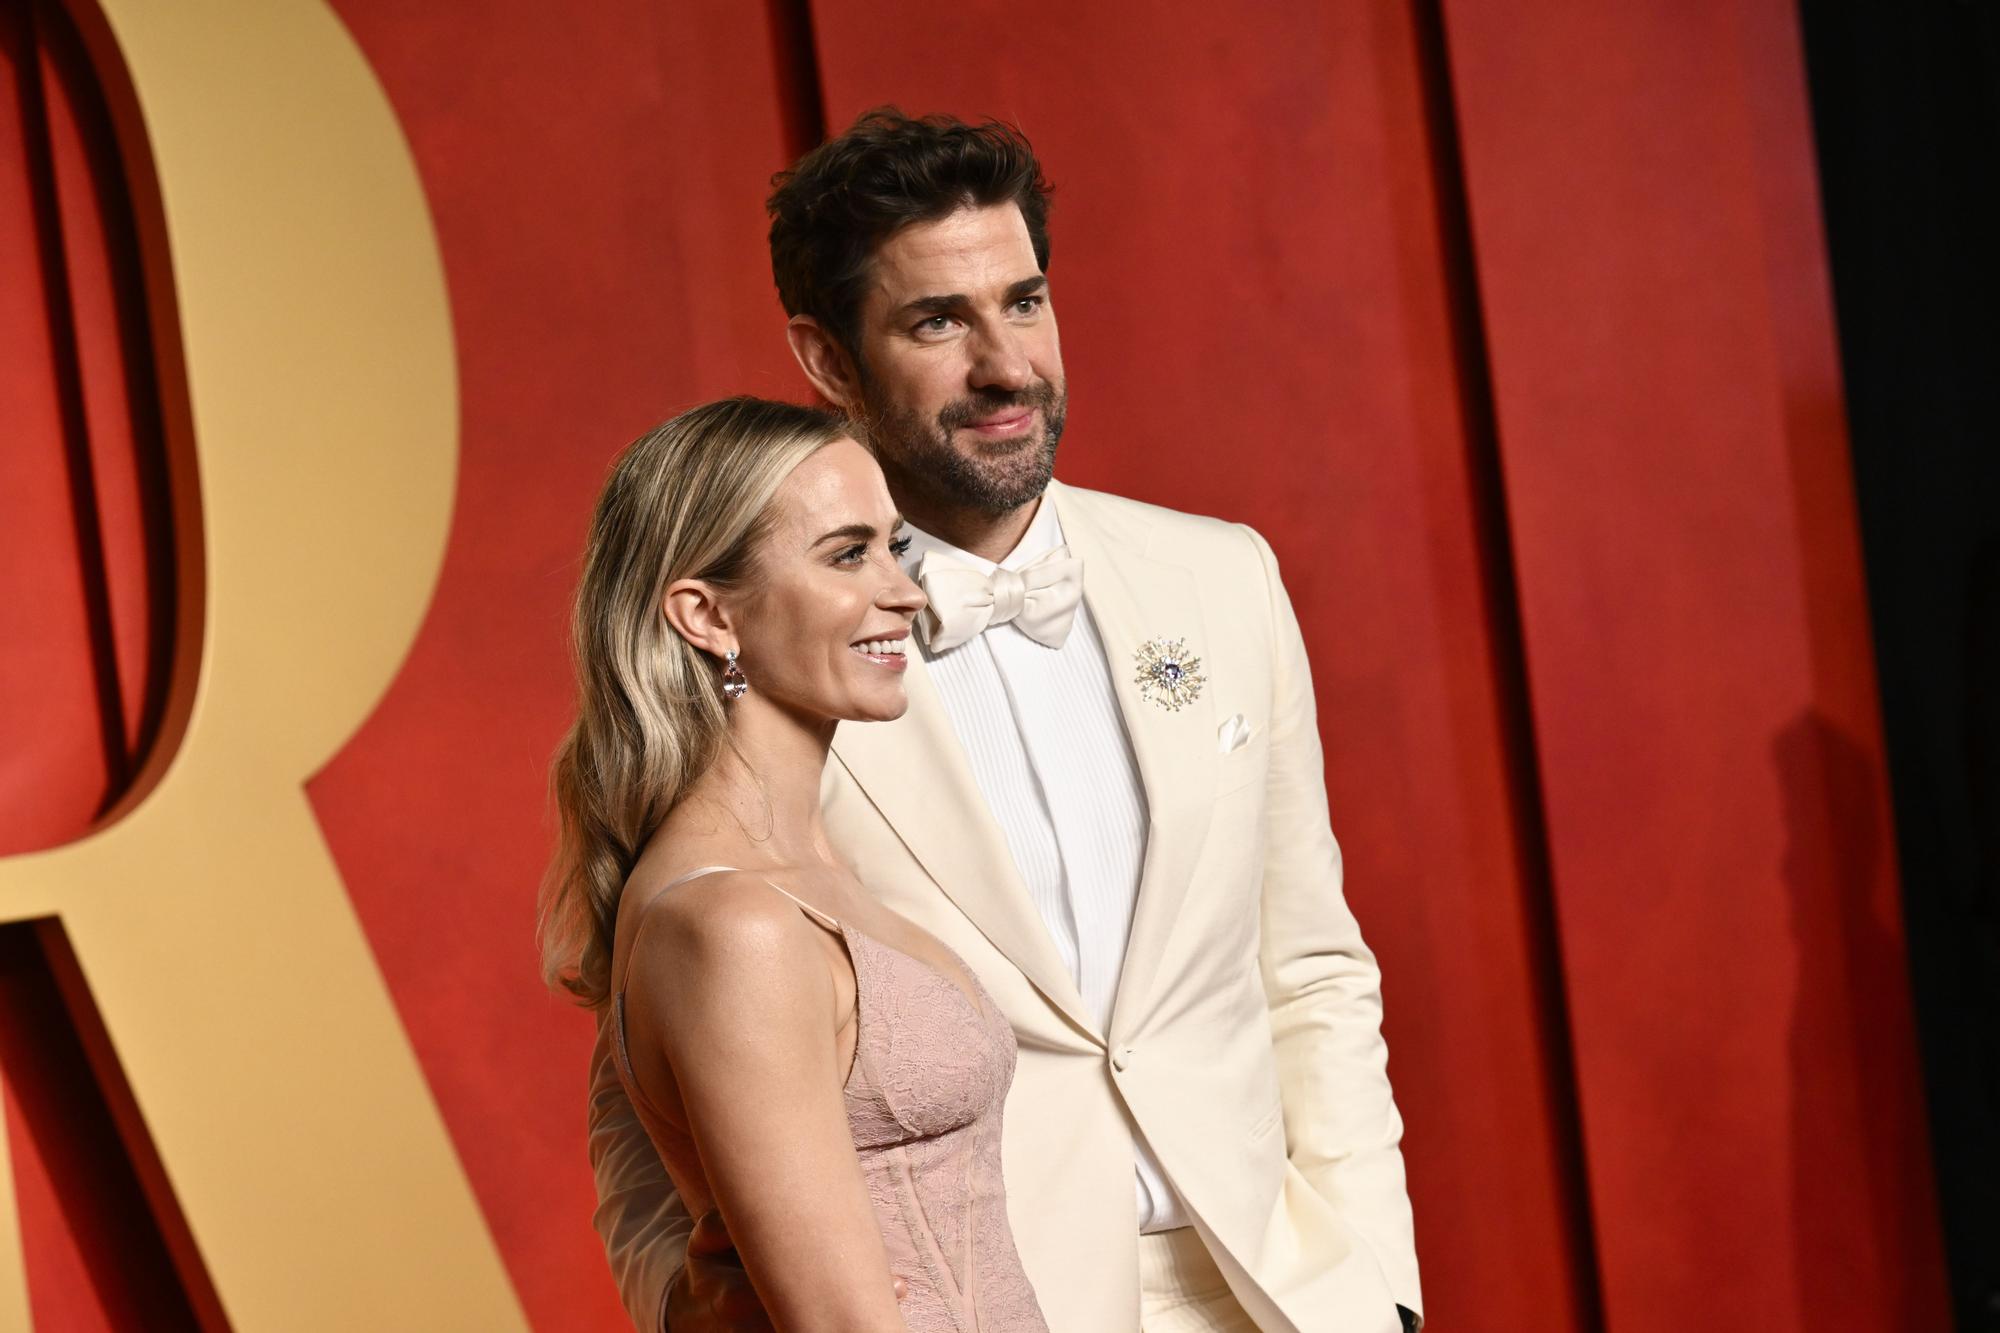 Emily Blunt, left, and John Krasinski arrive at the Vanity Fair Oscar Party on Sunday, March 10, 2024, at the Wallis Annenberg Center for the Performing Arts in Beverly Hills, Calif. (Photo by Evan Agostini/Invision/AP) / 031024130199, 21334631,